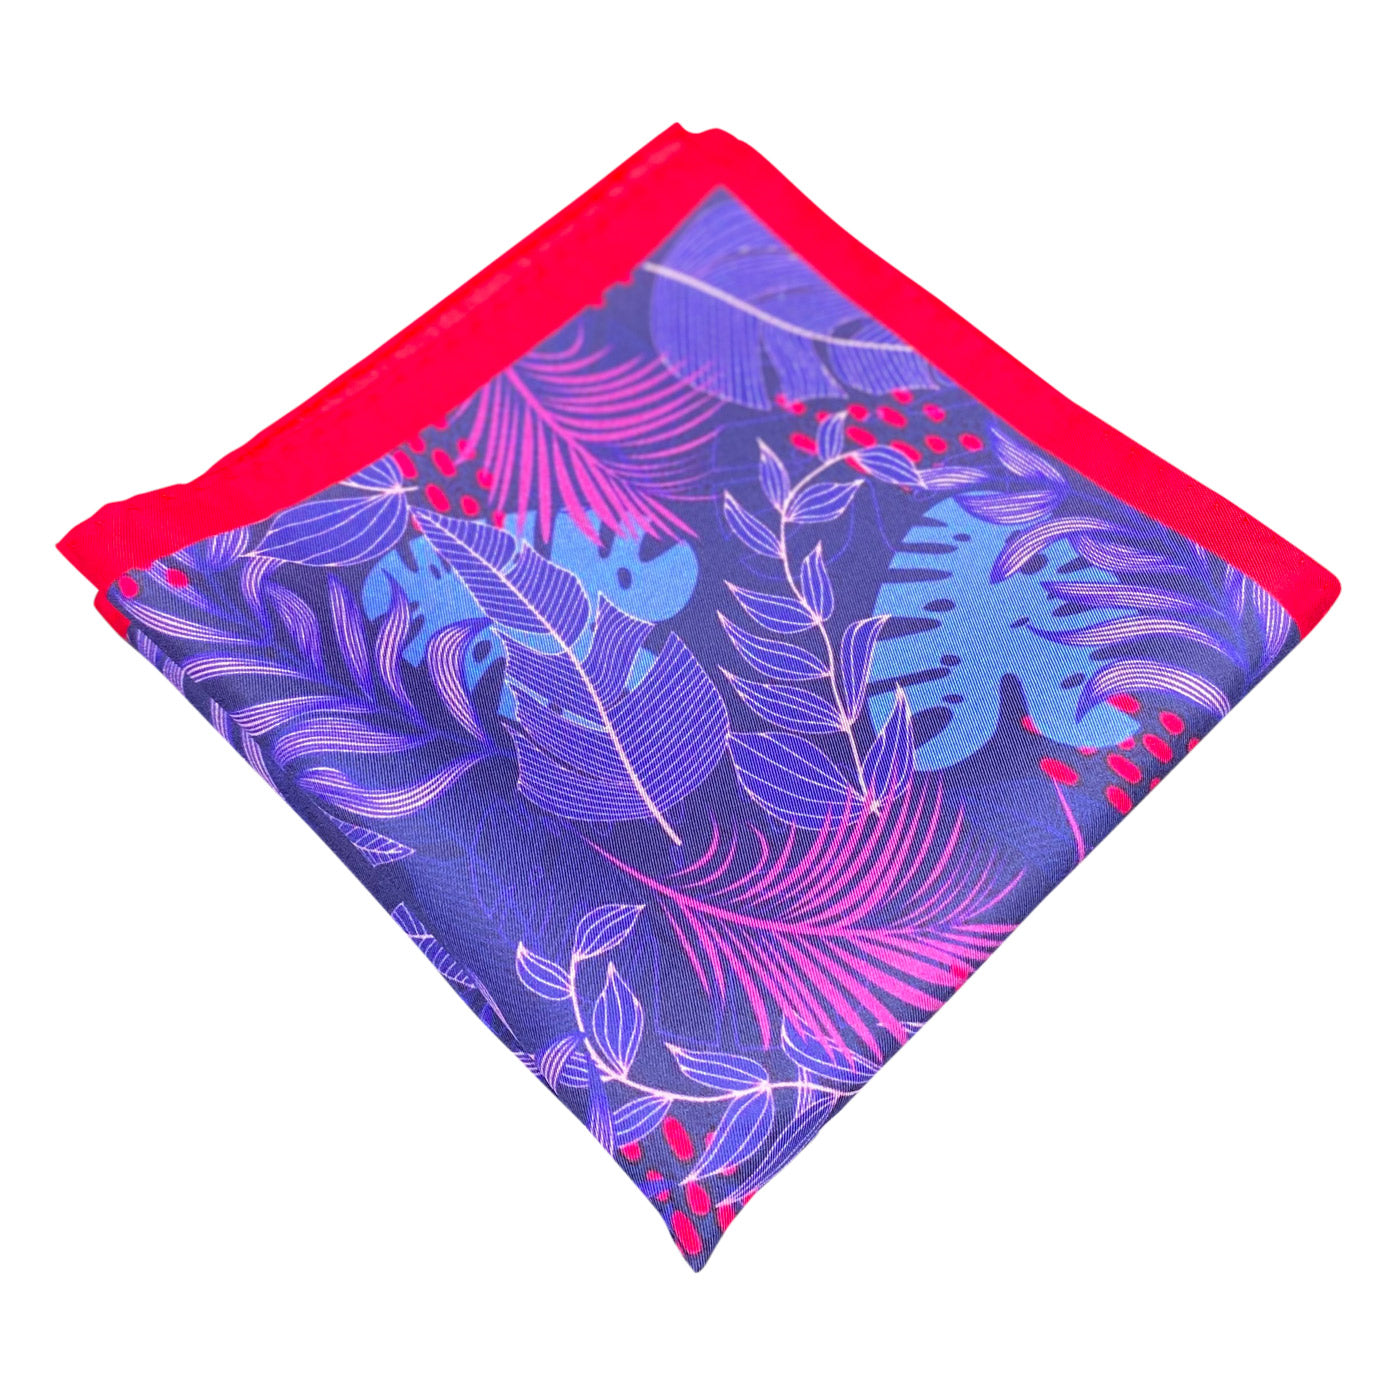 Folded 'Mersey' silk pocket square from SOHO Scarves, showing the blue and pink leaf patterns. Placed on a light background.